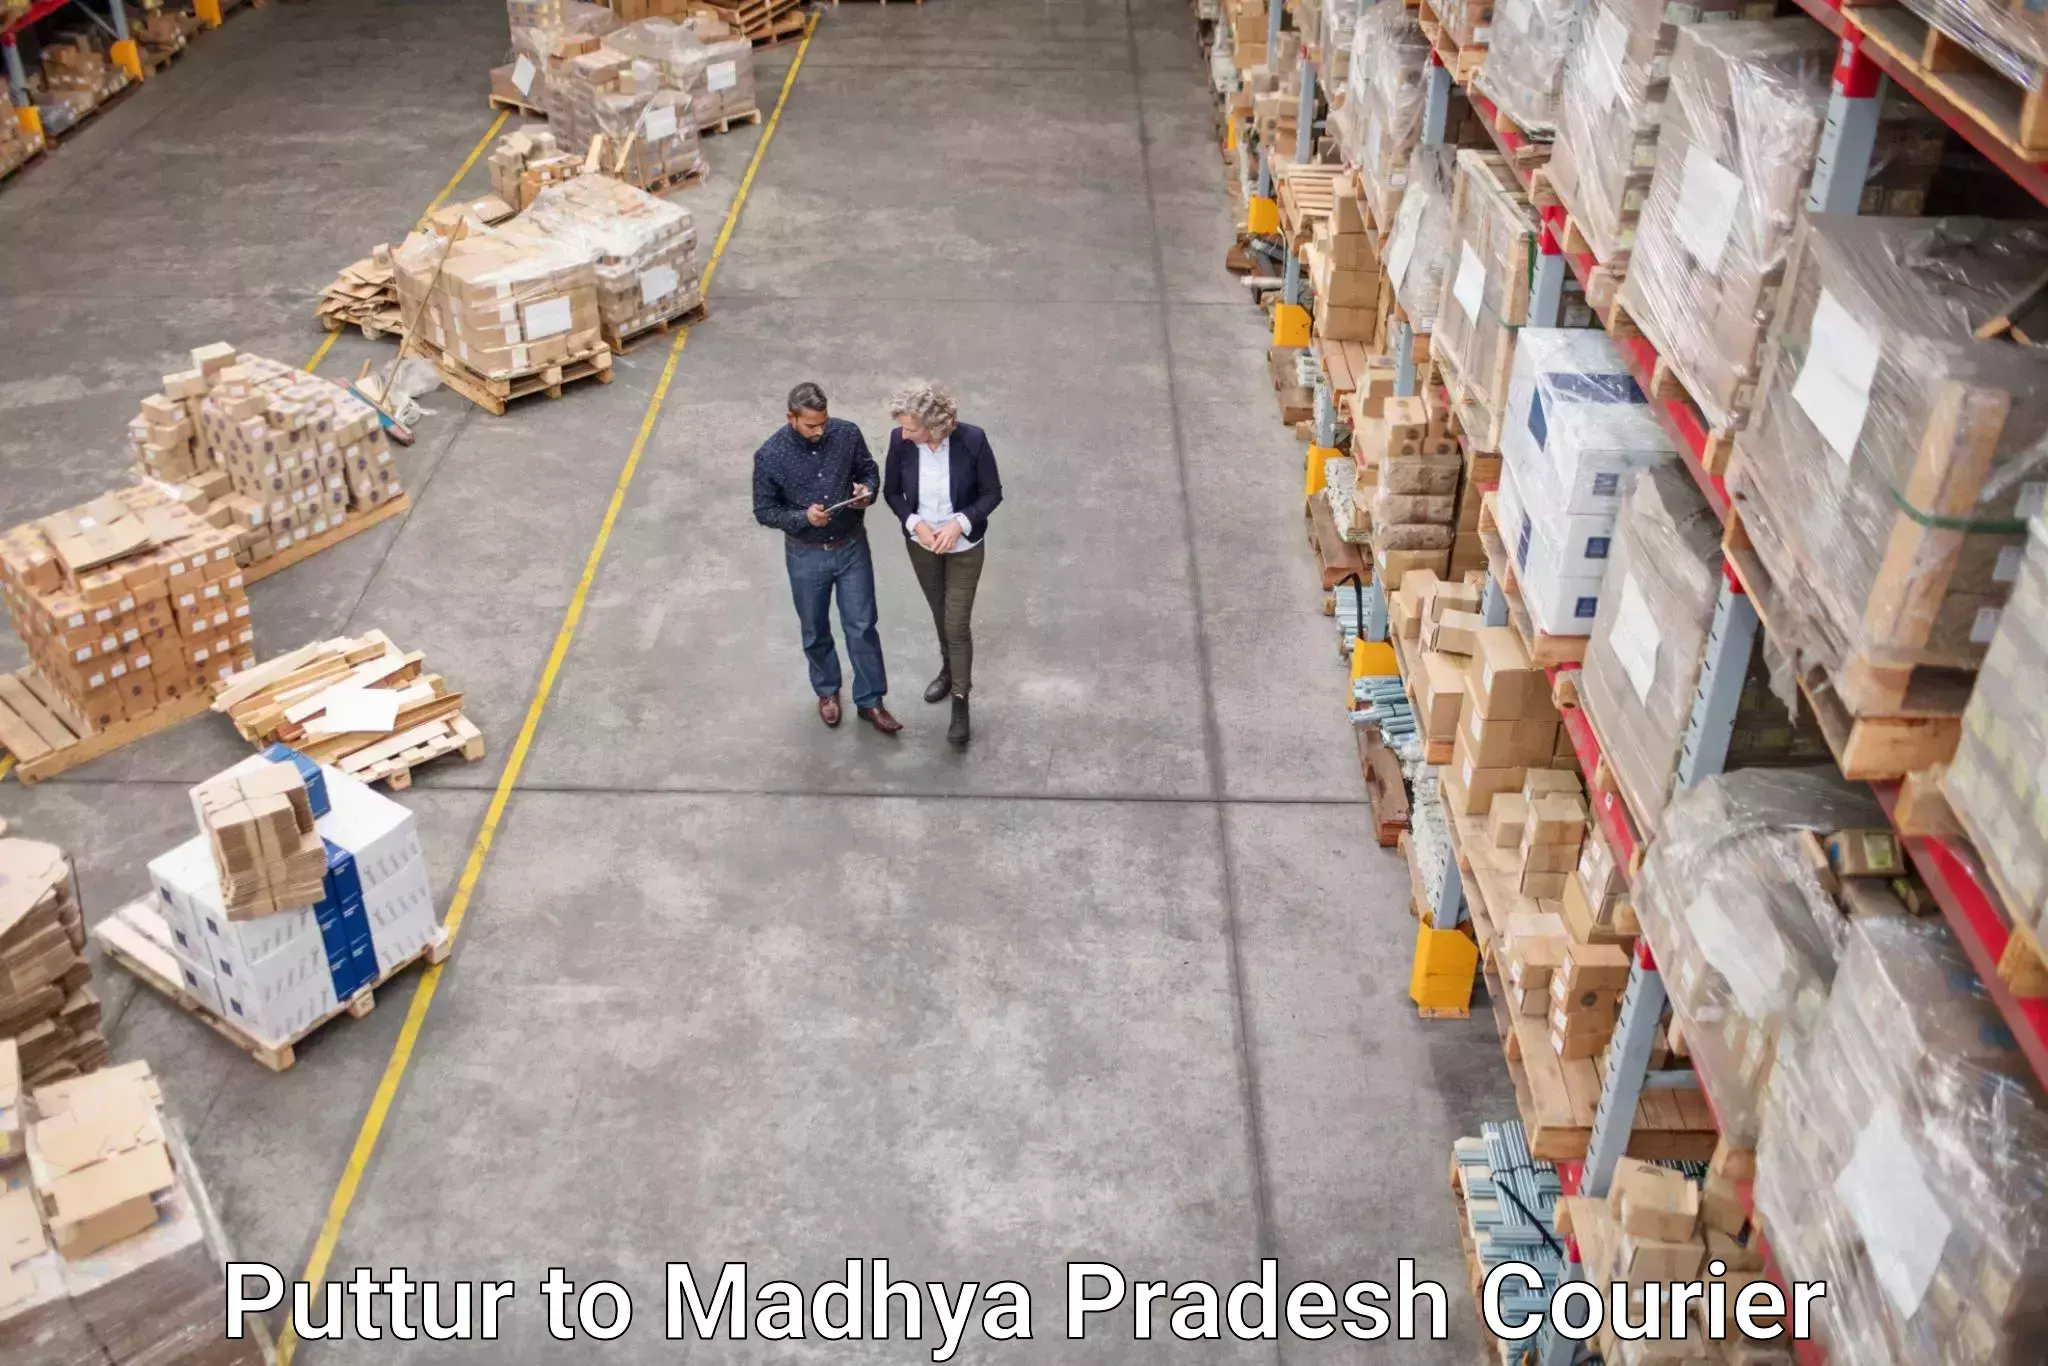 Reliable shipping partners in Puttur to Lavkush Nagar